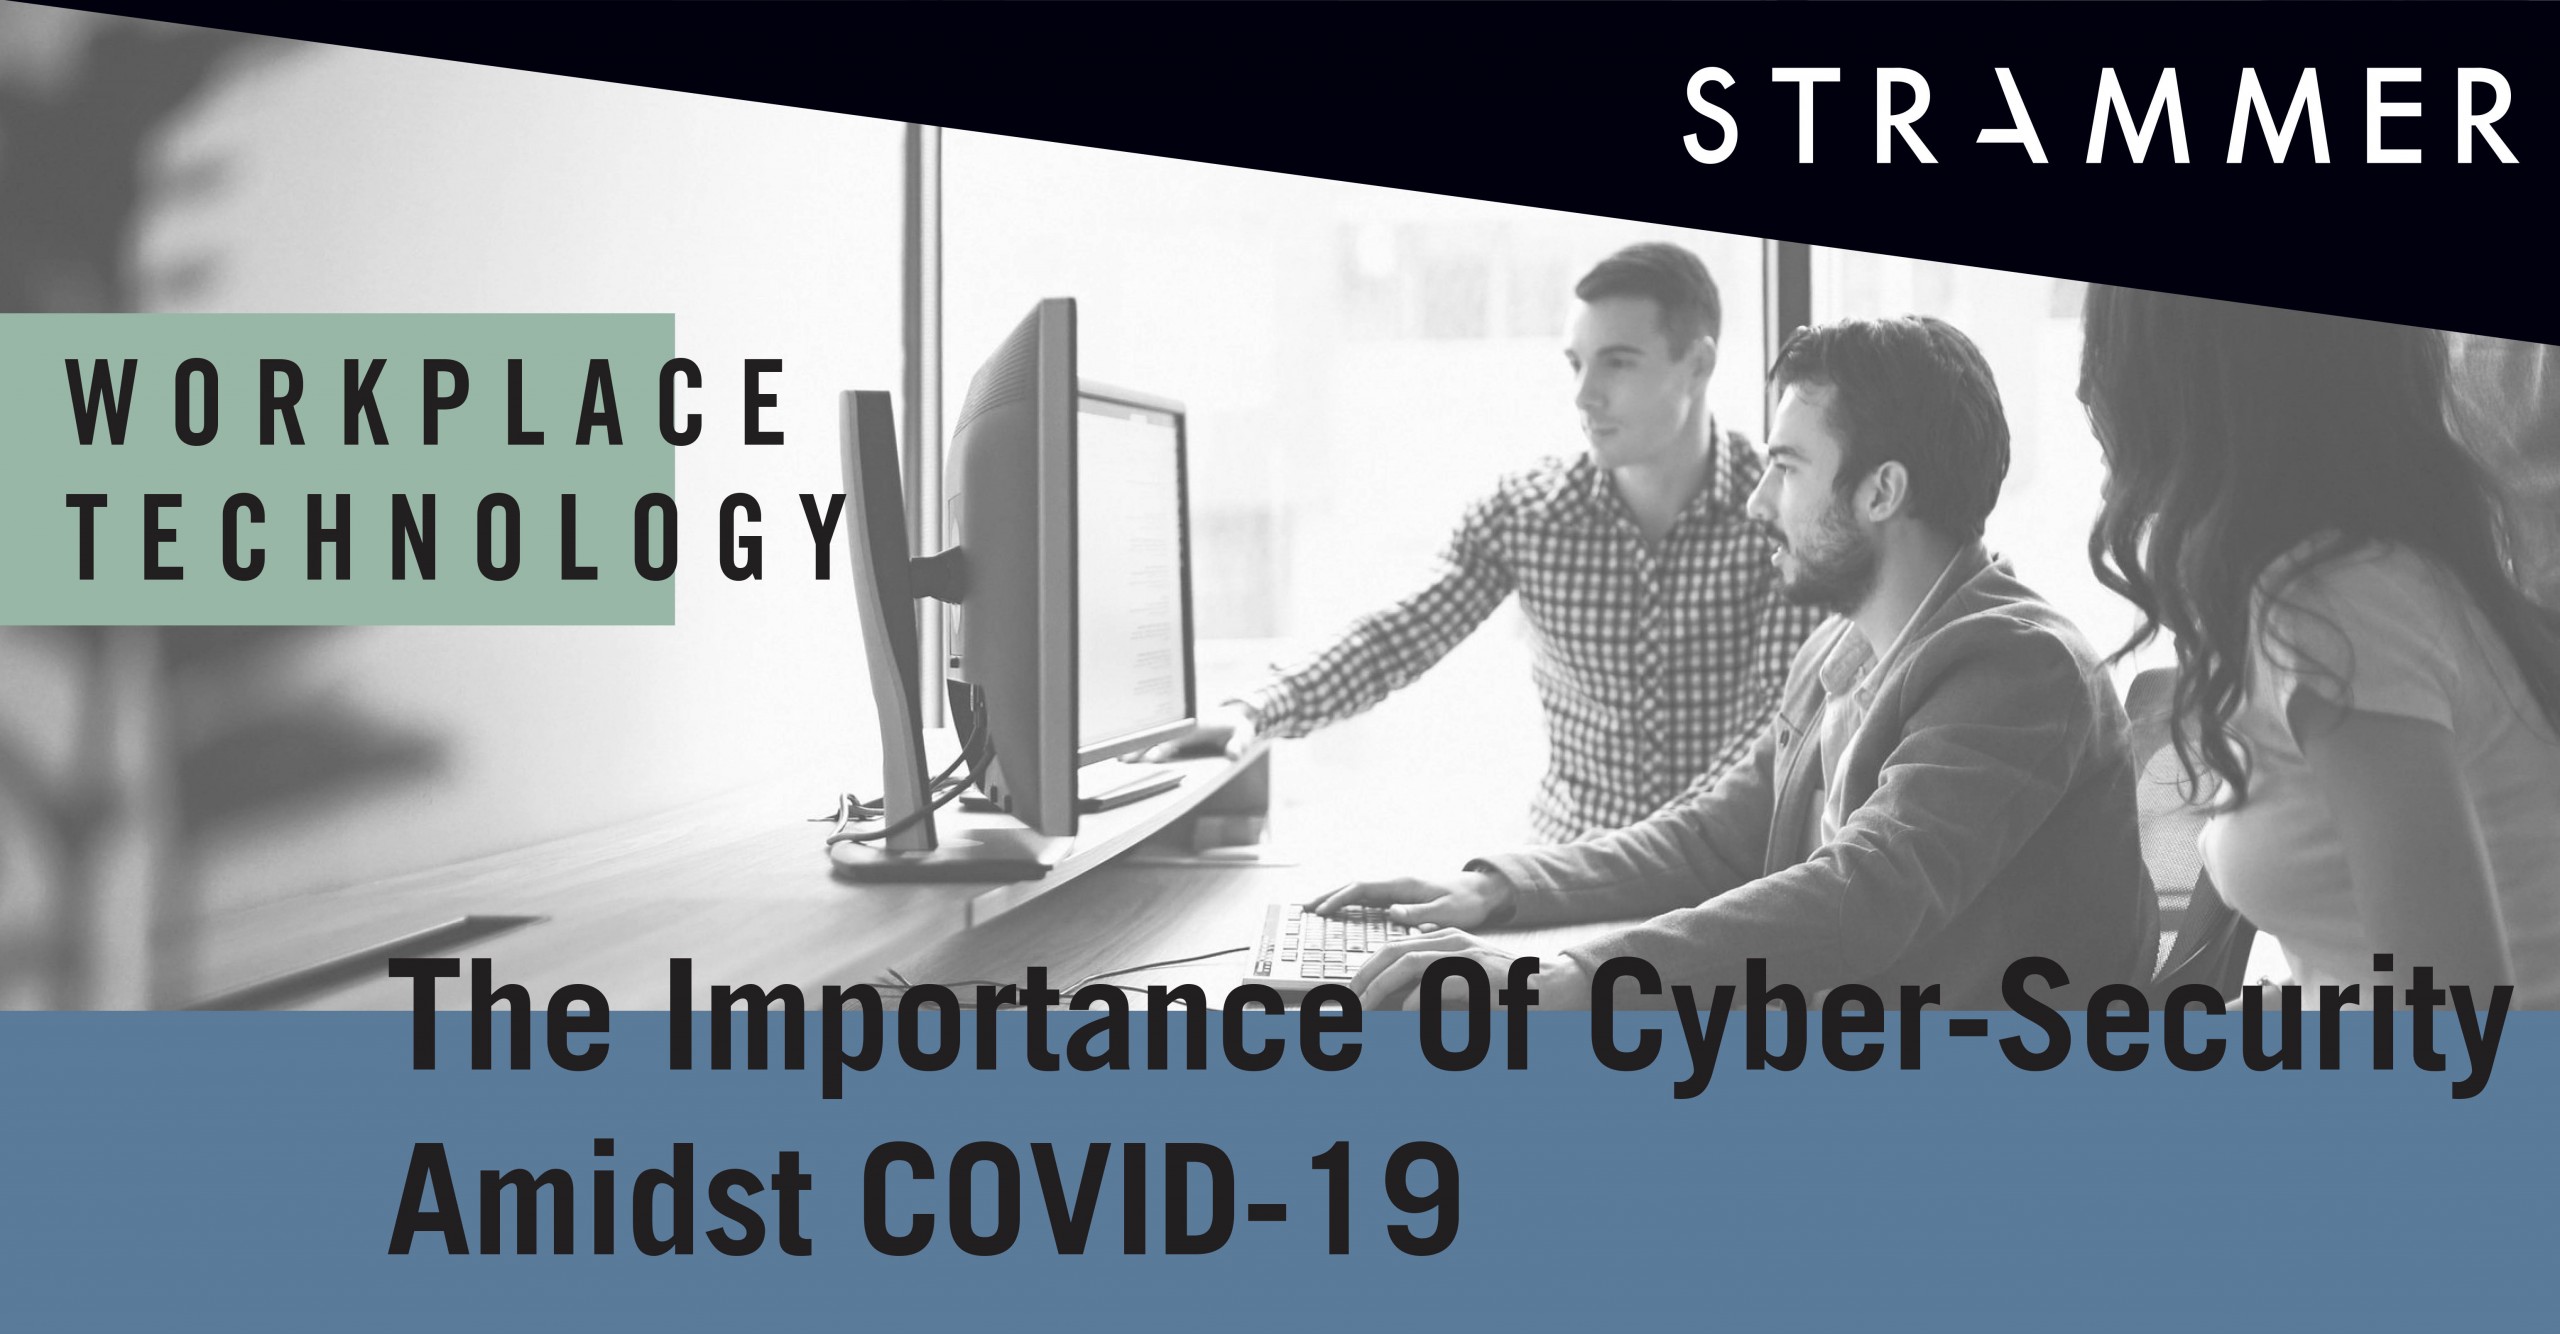 Workplace Cybersecurity During COVID-19